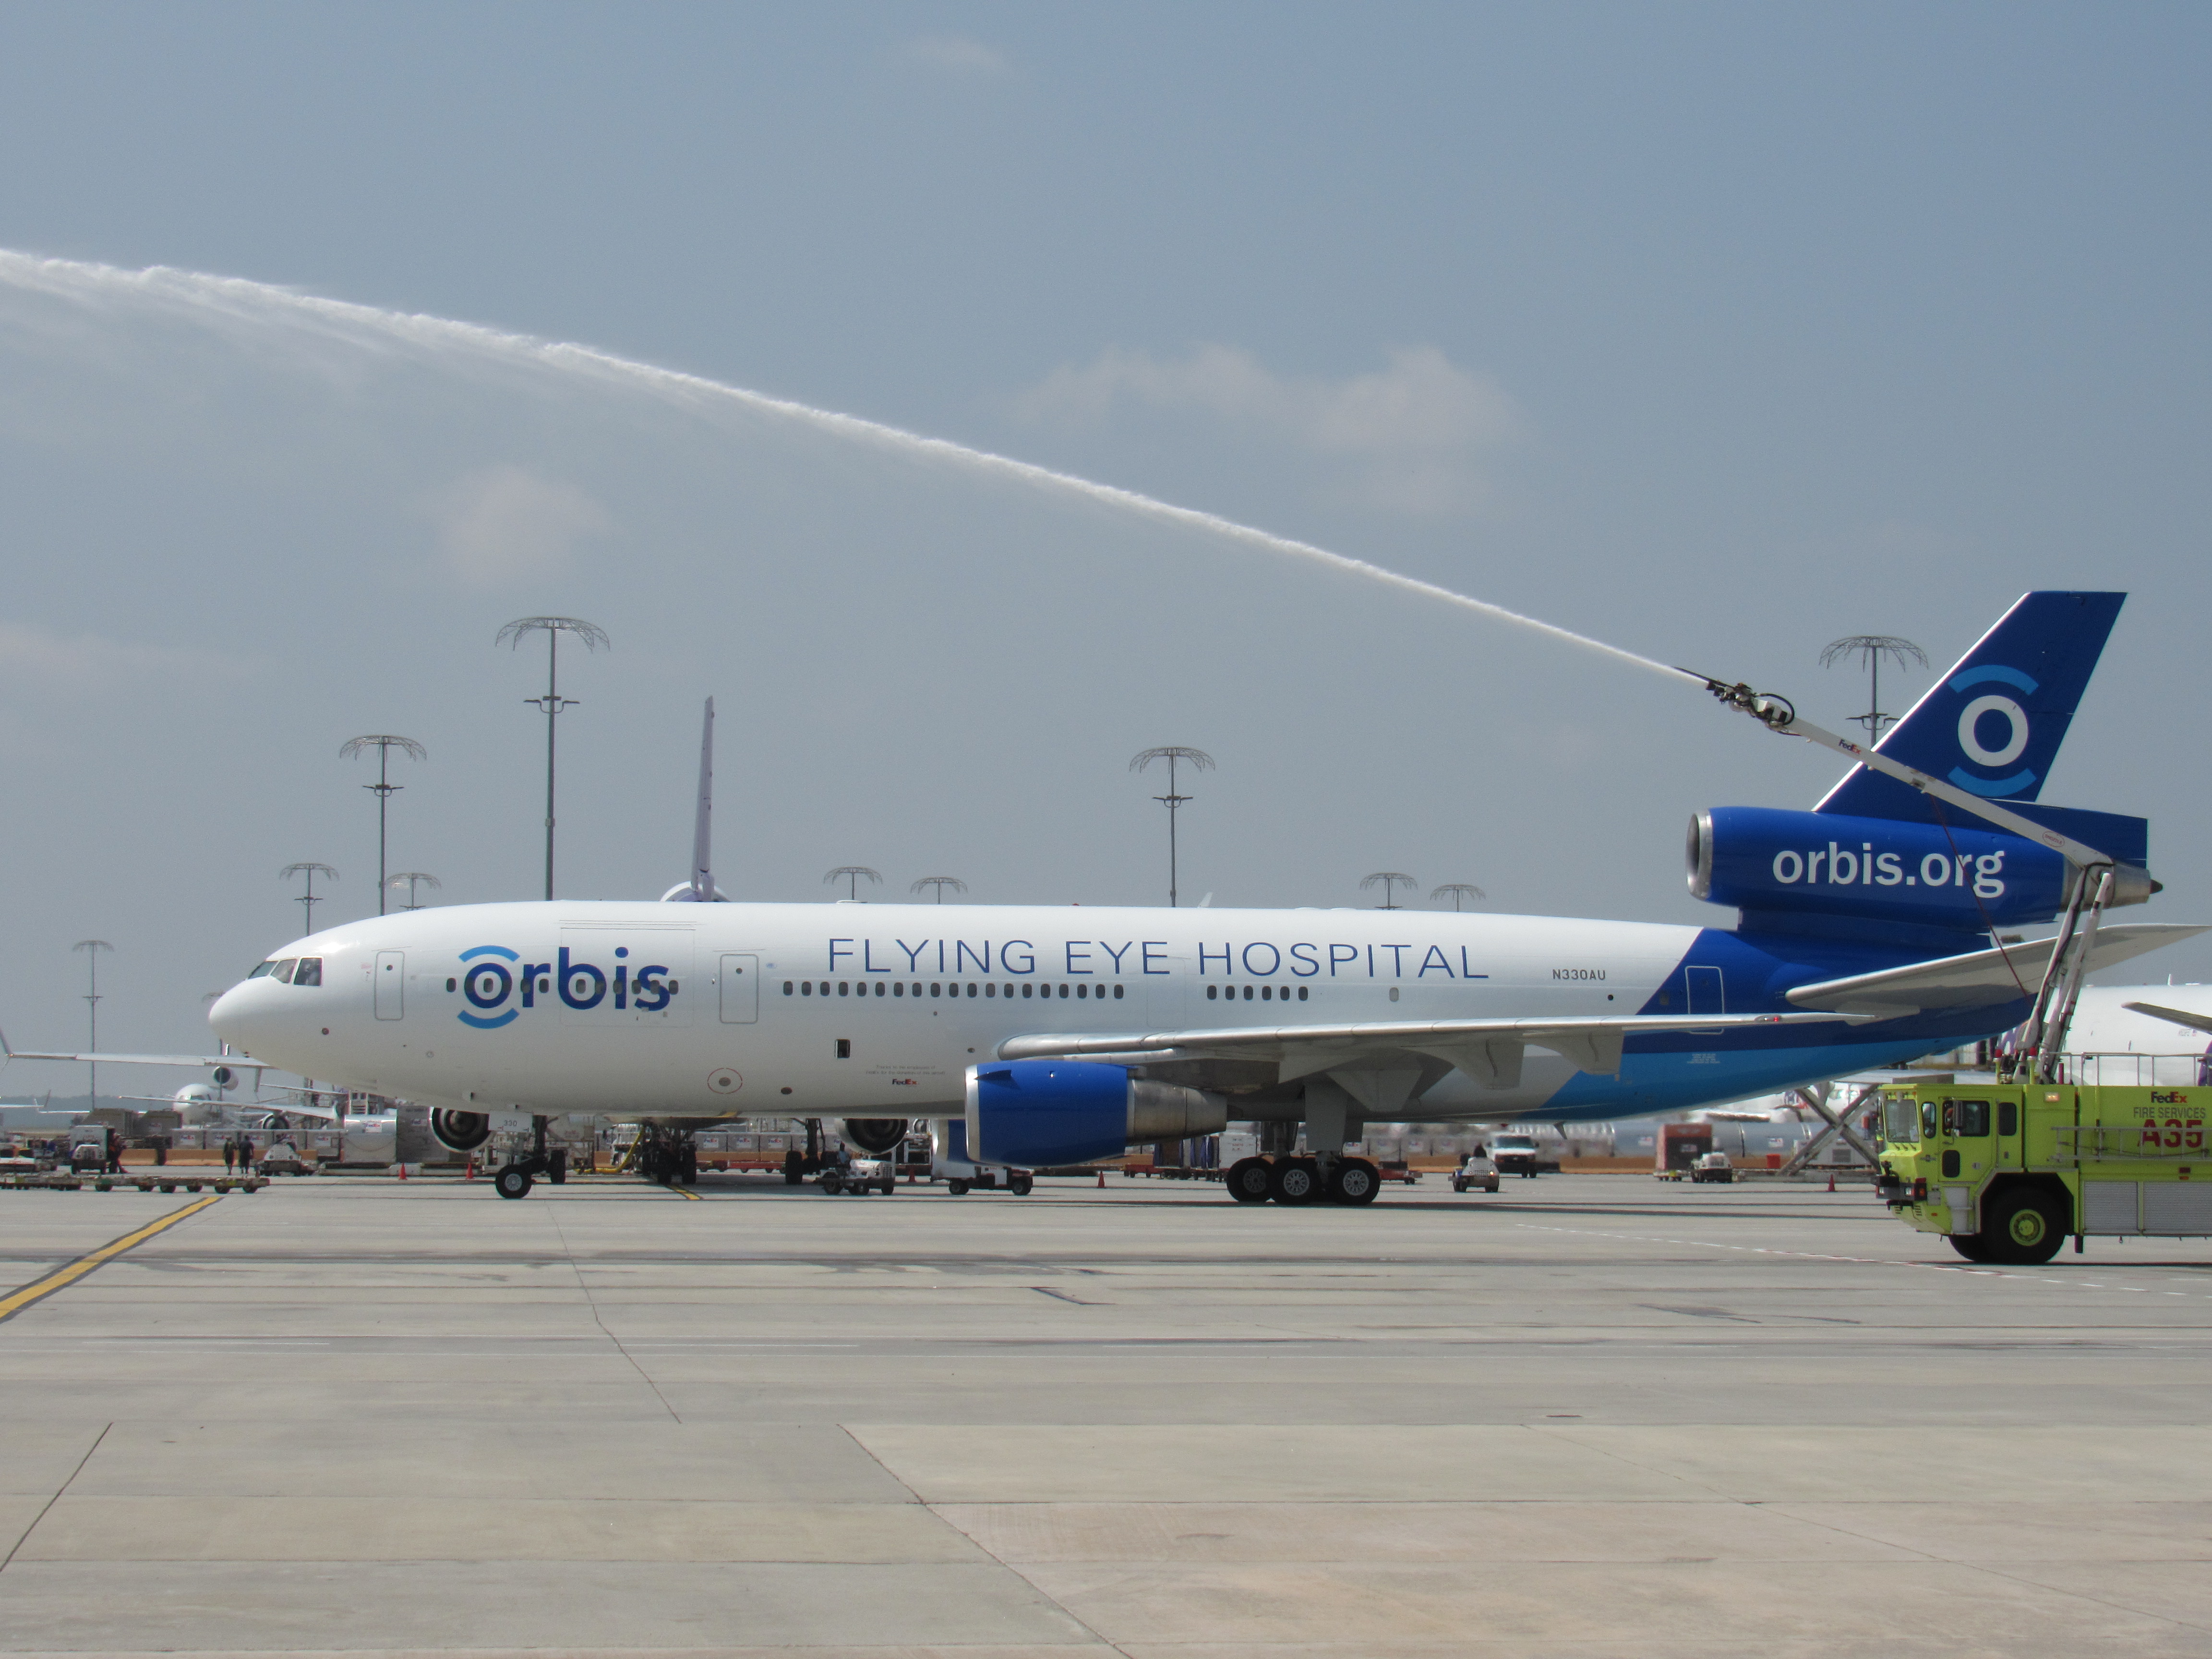 Photo Gallery: Take A Tour Of Orbis' New MD-10 Flying Eye Hospital ...